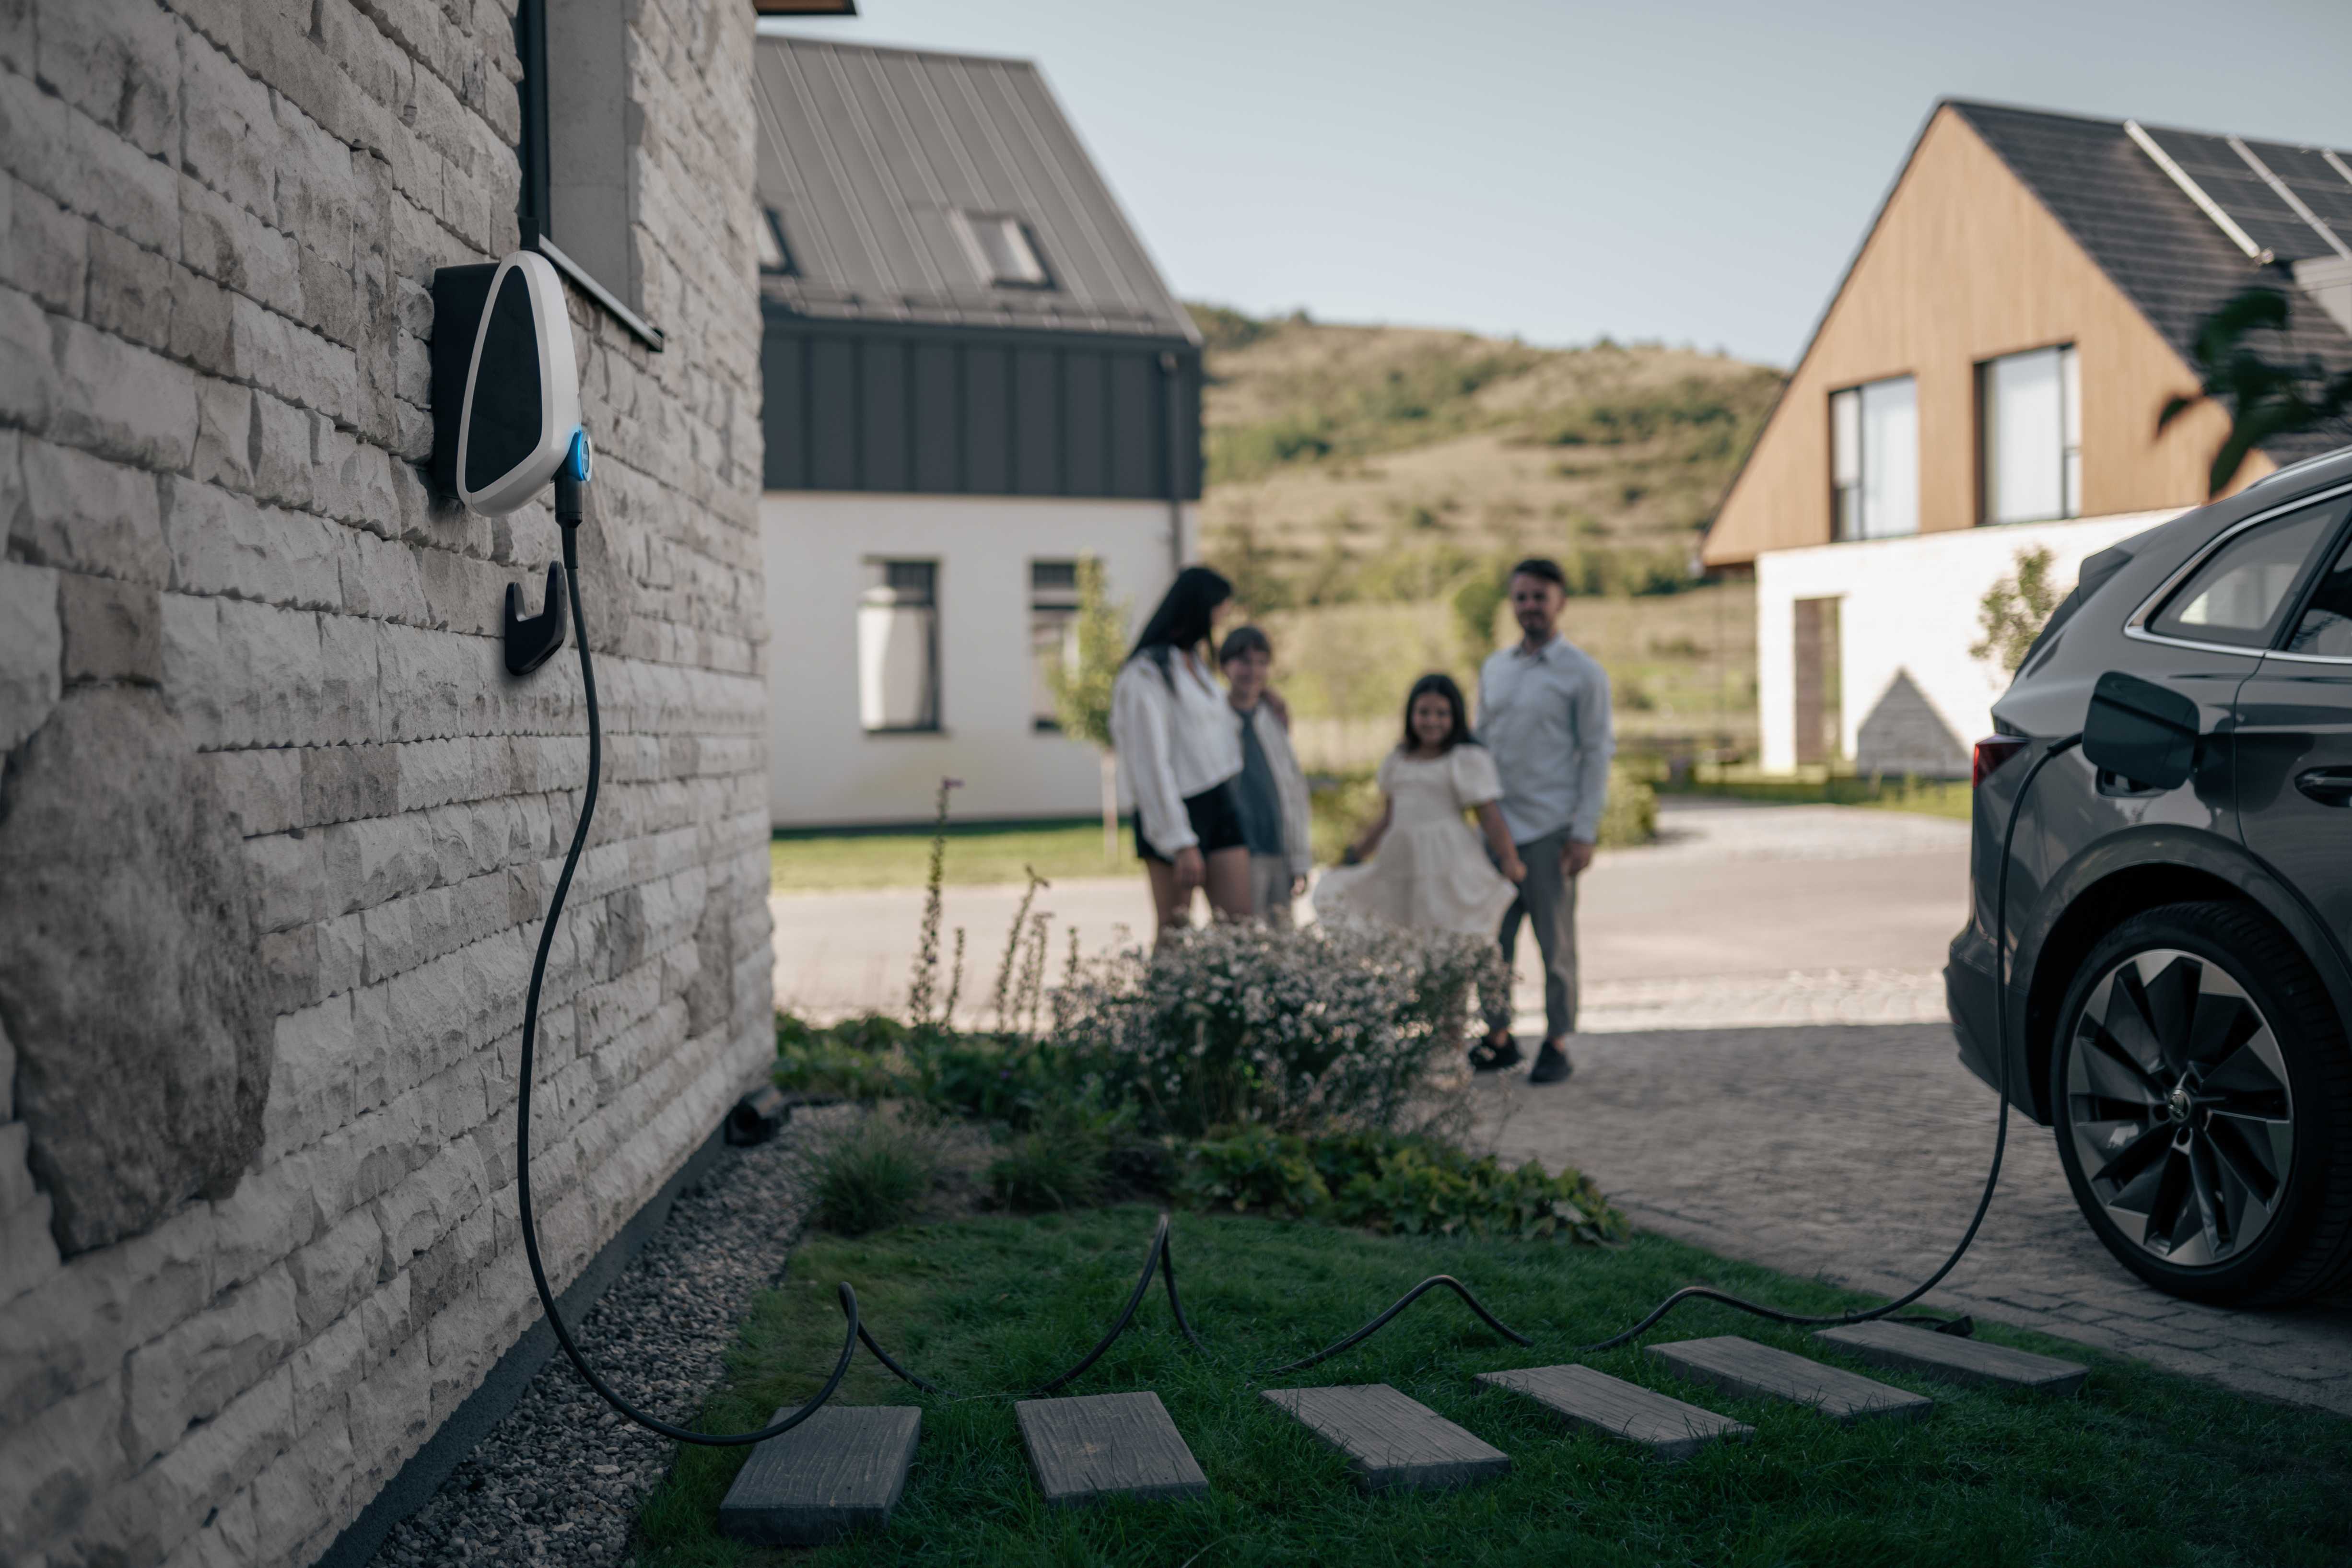 An Elvi charger mounted on the house's brick wall while the EV is connected to it. At the background, a family is enjoying their time together.